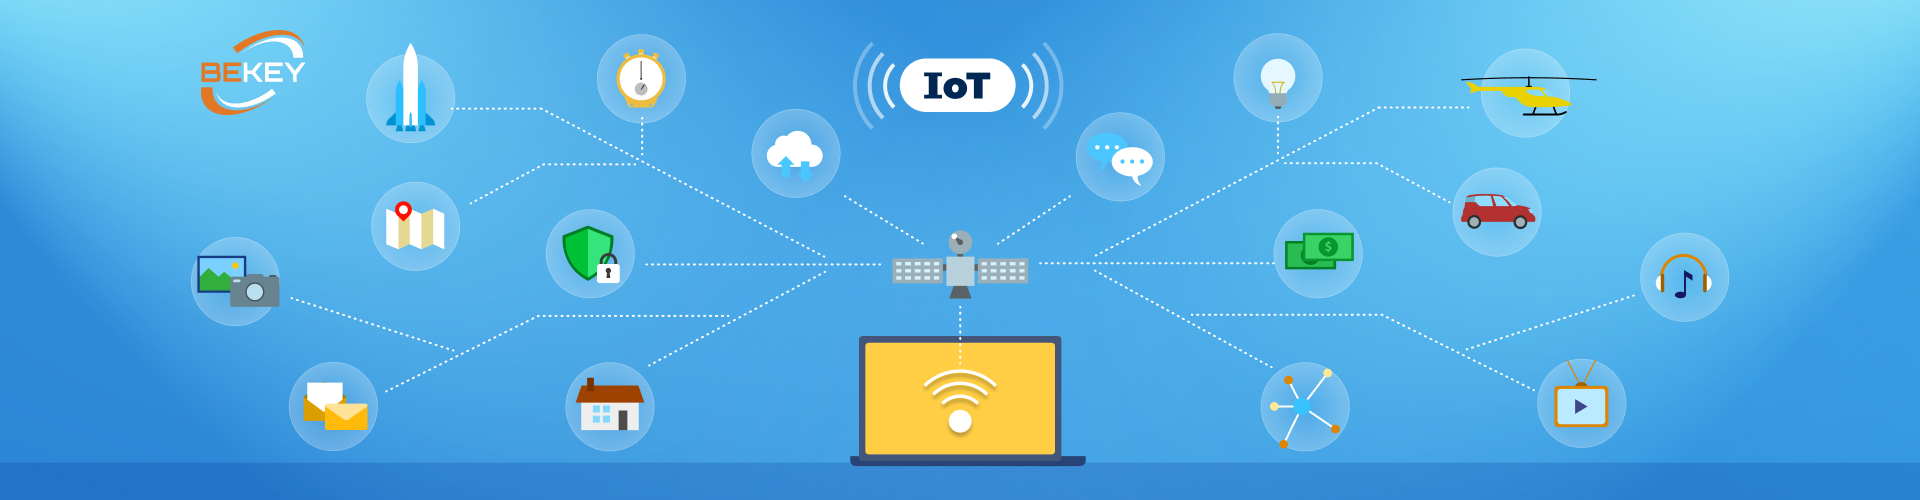 How Has the IoT Changed Software Engineering? - image